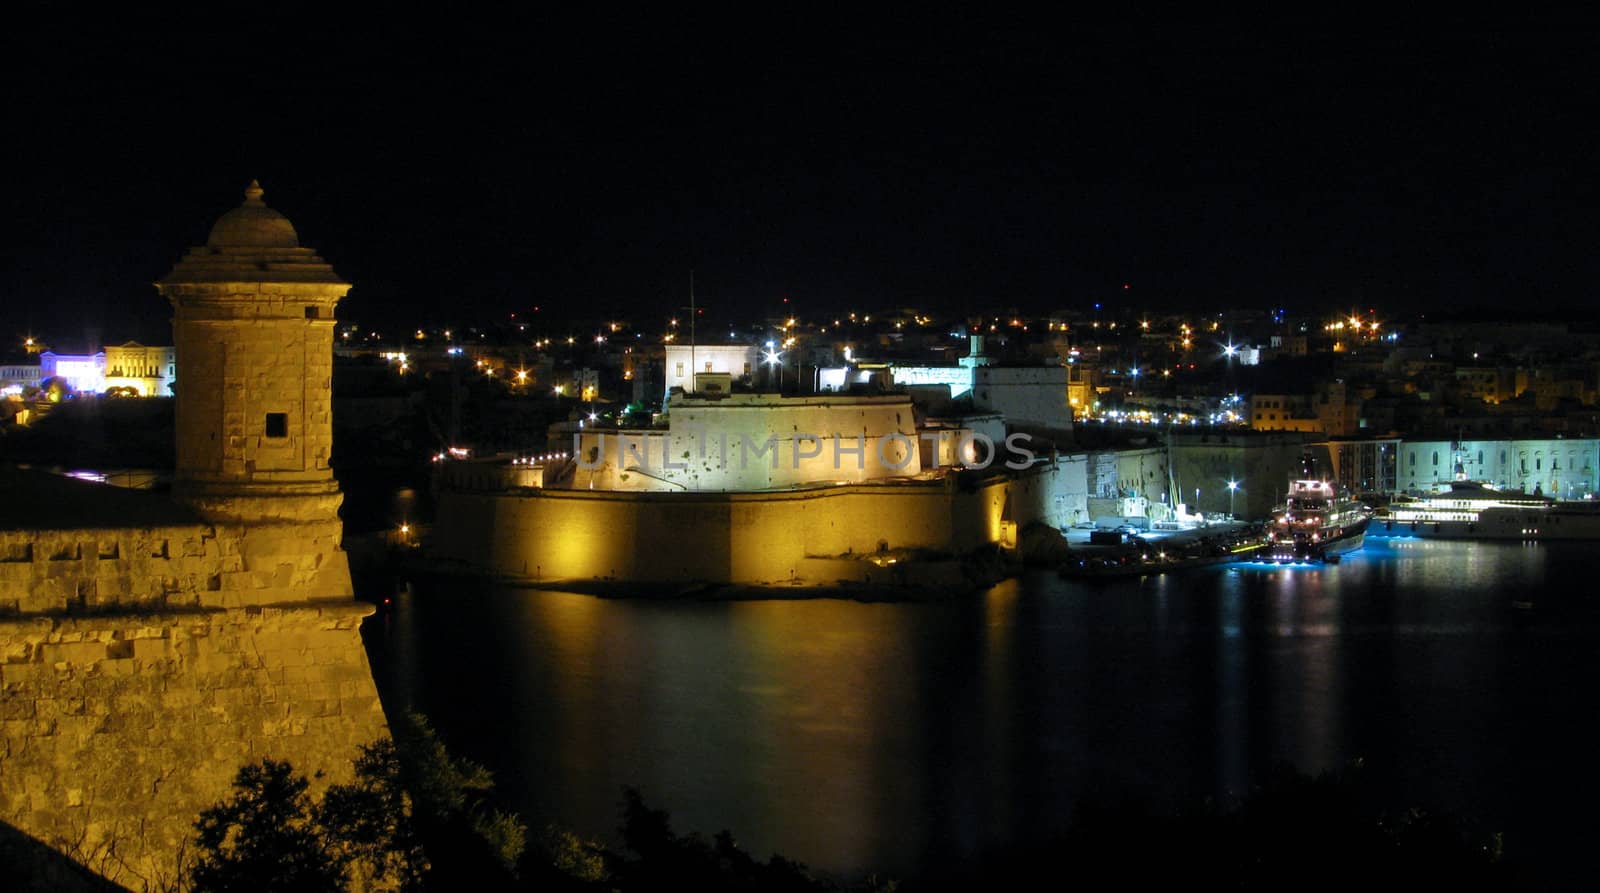 The Grand Harbour by night as seen from Valletta, Malta.